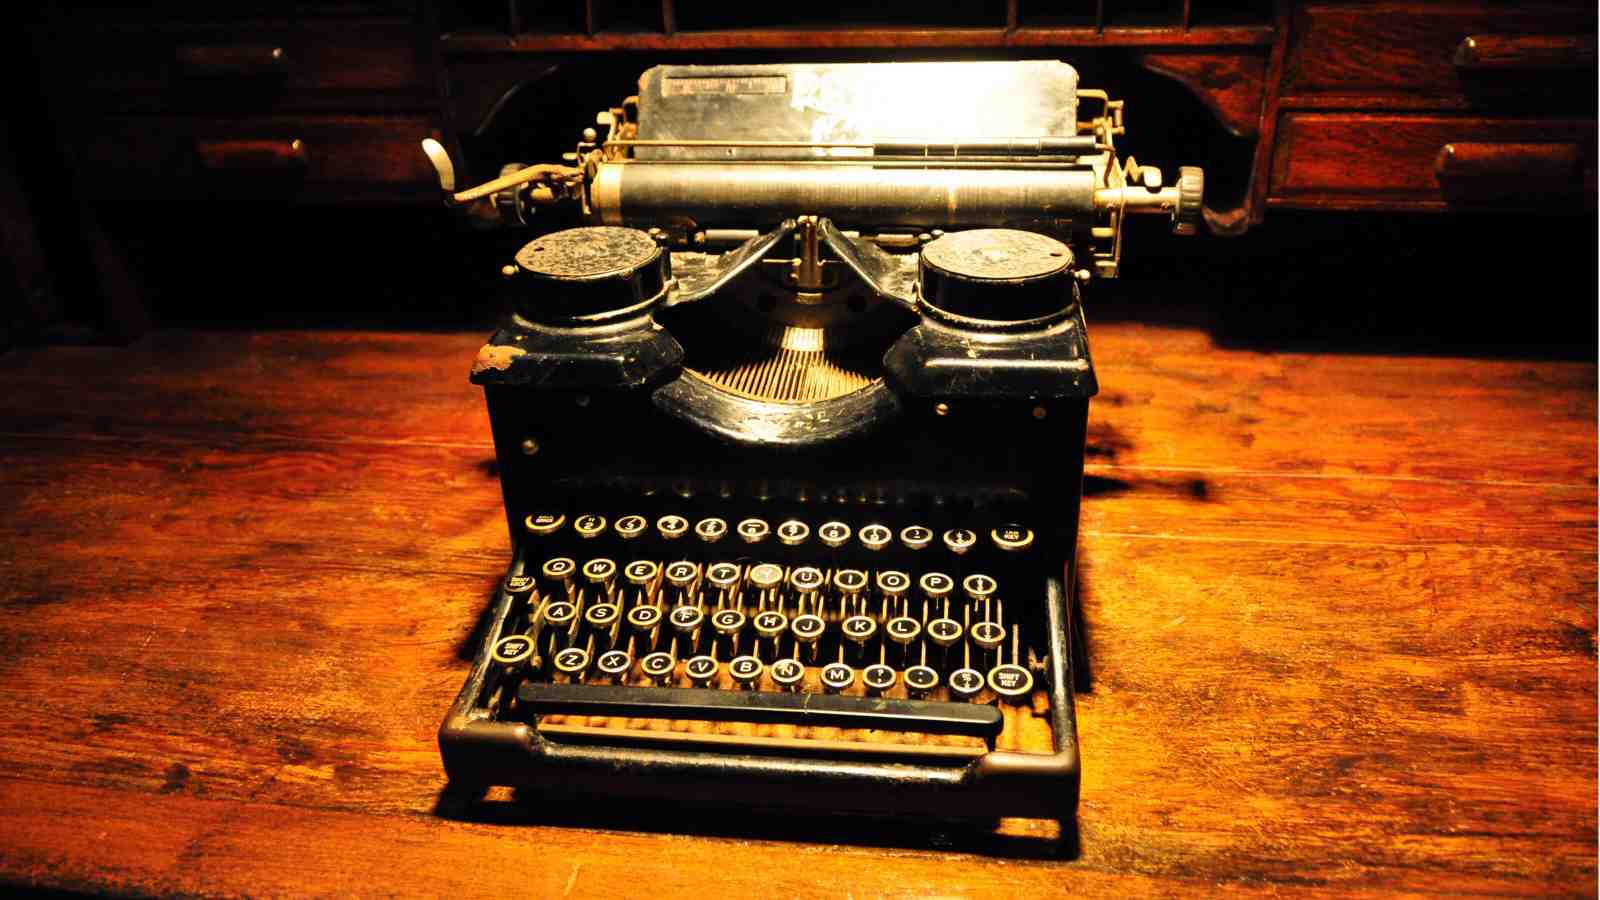 An image of an old black typewriter on a wooden desk.